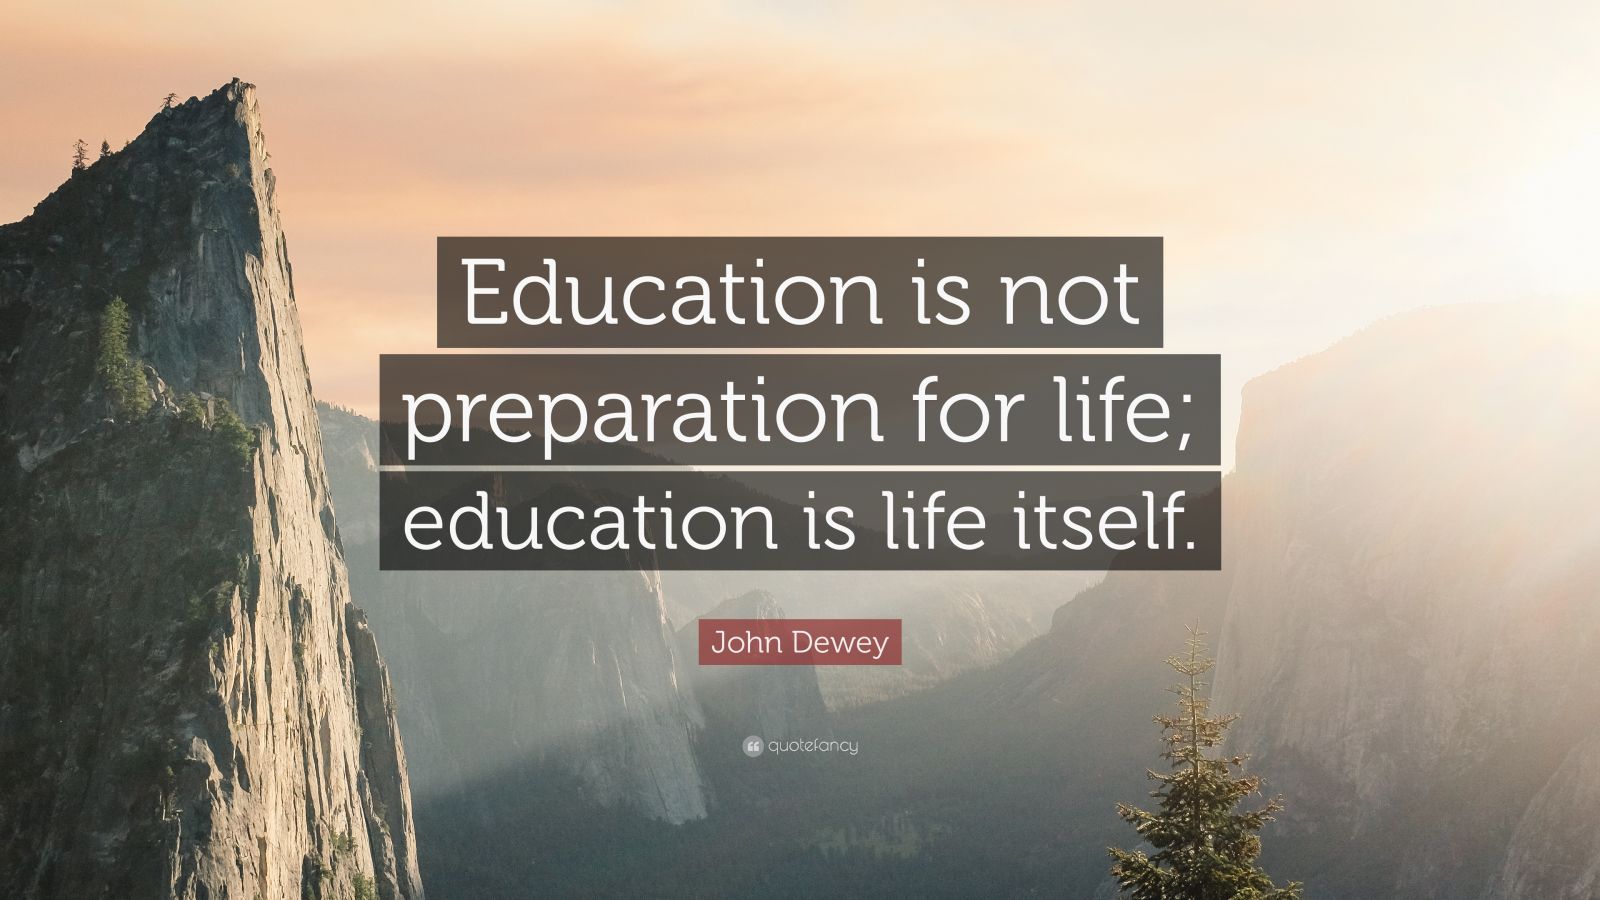 education quotes by unknown authors